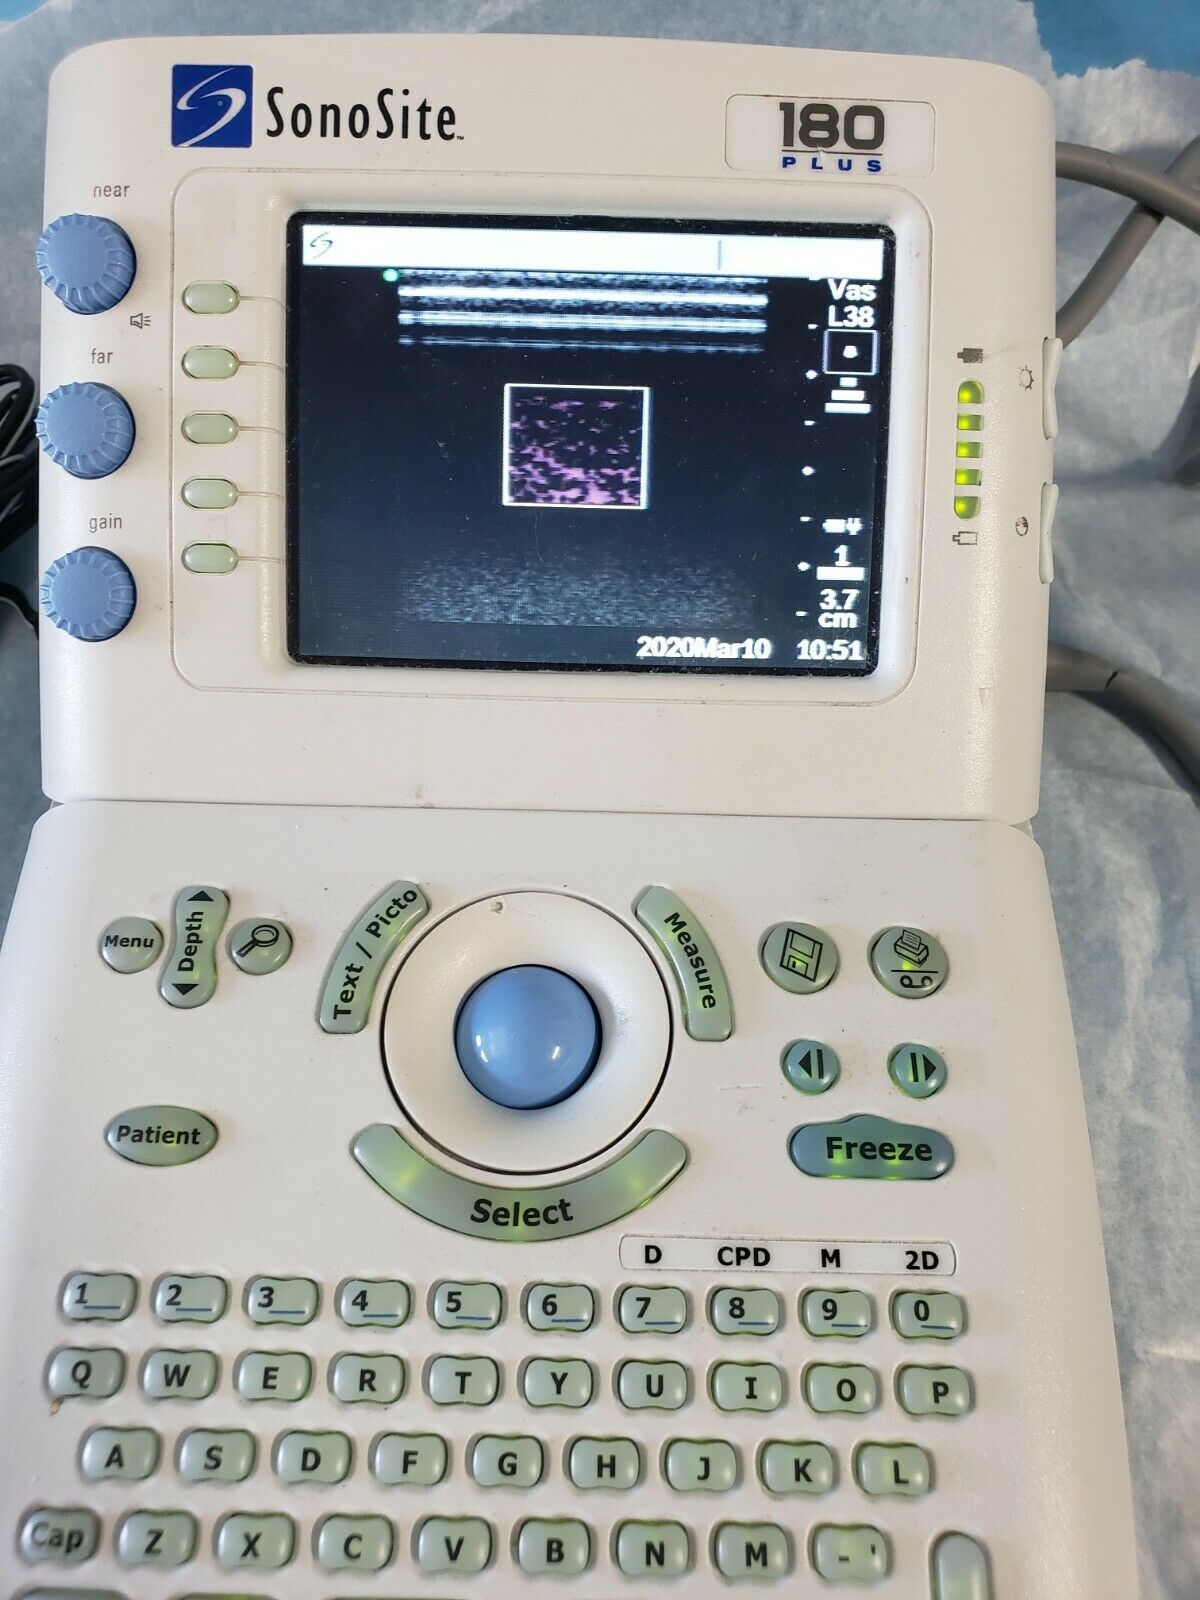 SONOSITE 180 PLUS ULTRASOUND MACHINE WITH 2 TRANSDUCERS DIAGNOSTIC ULTRASOUND MACHINES FOR SALE